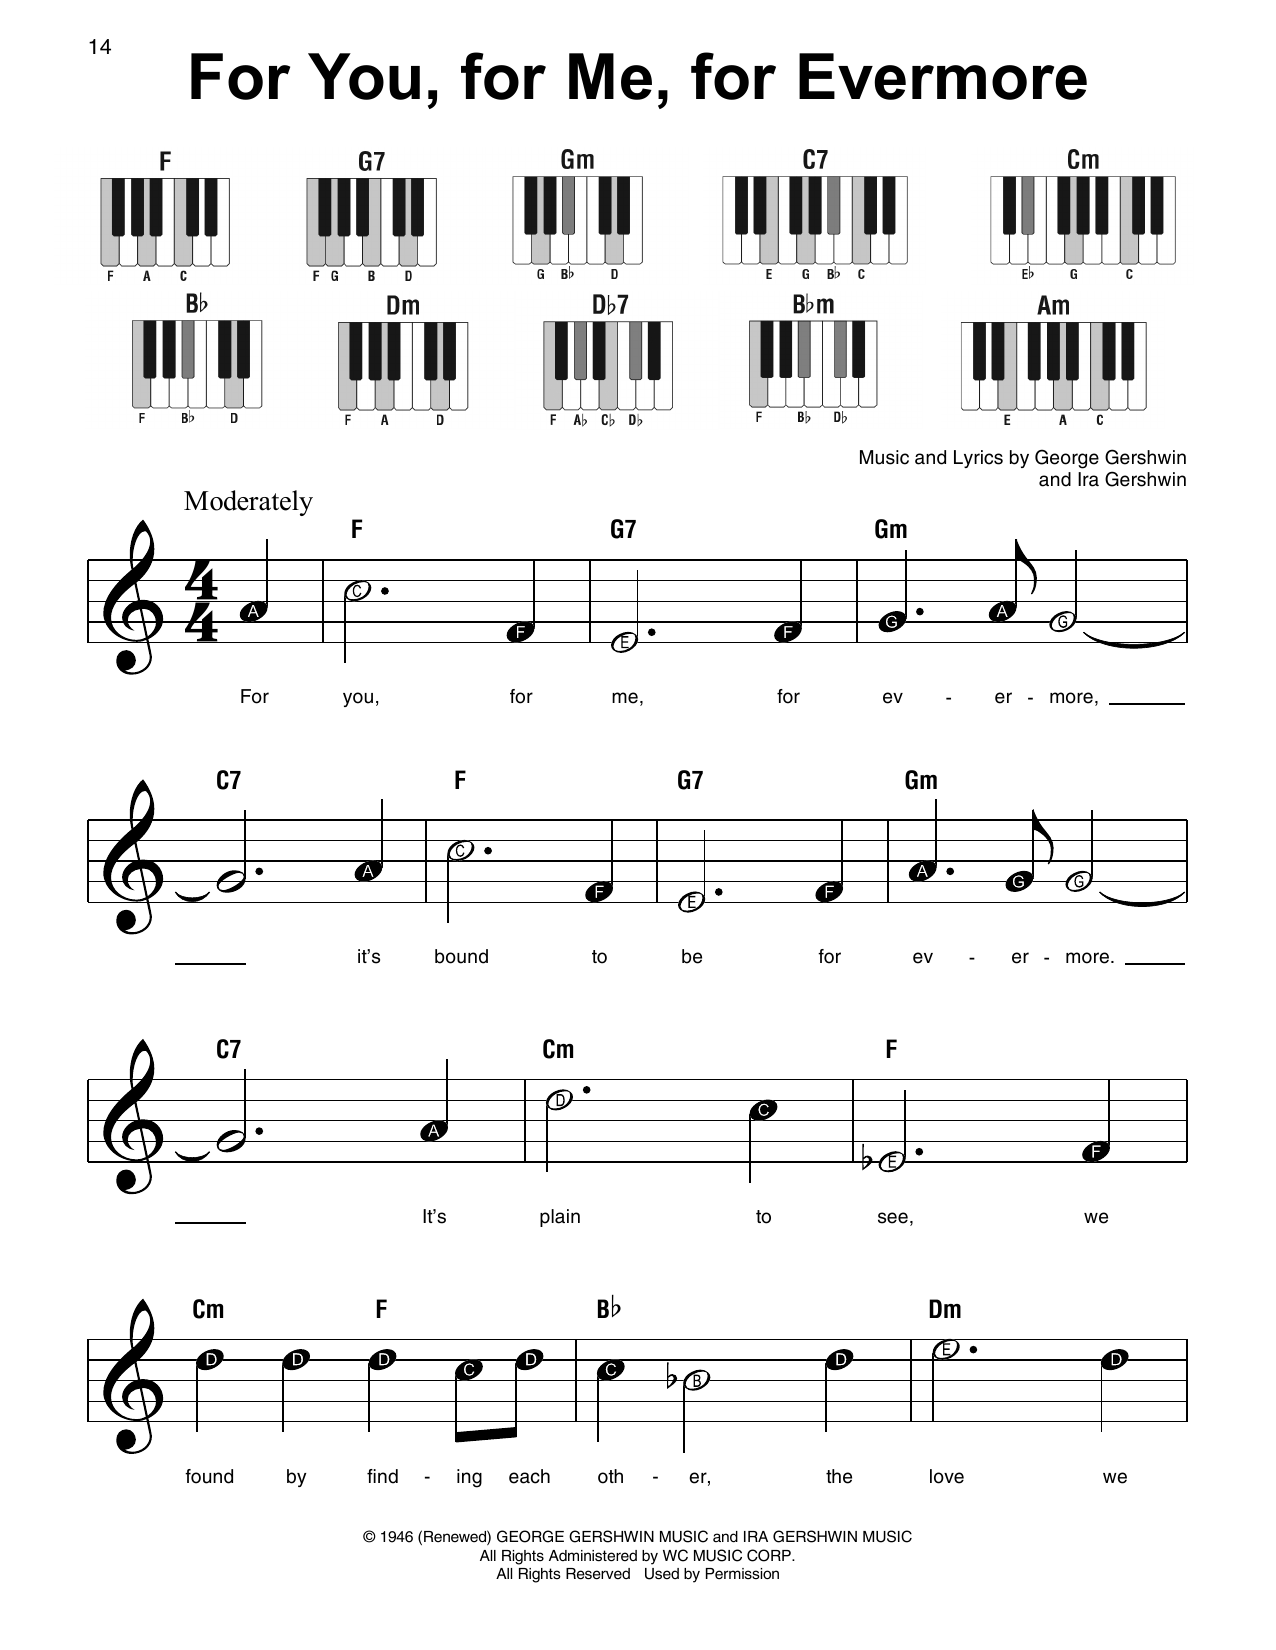 Download George Gershwin & Ira Gershwin For You, For Me For Evermore Sheet Music